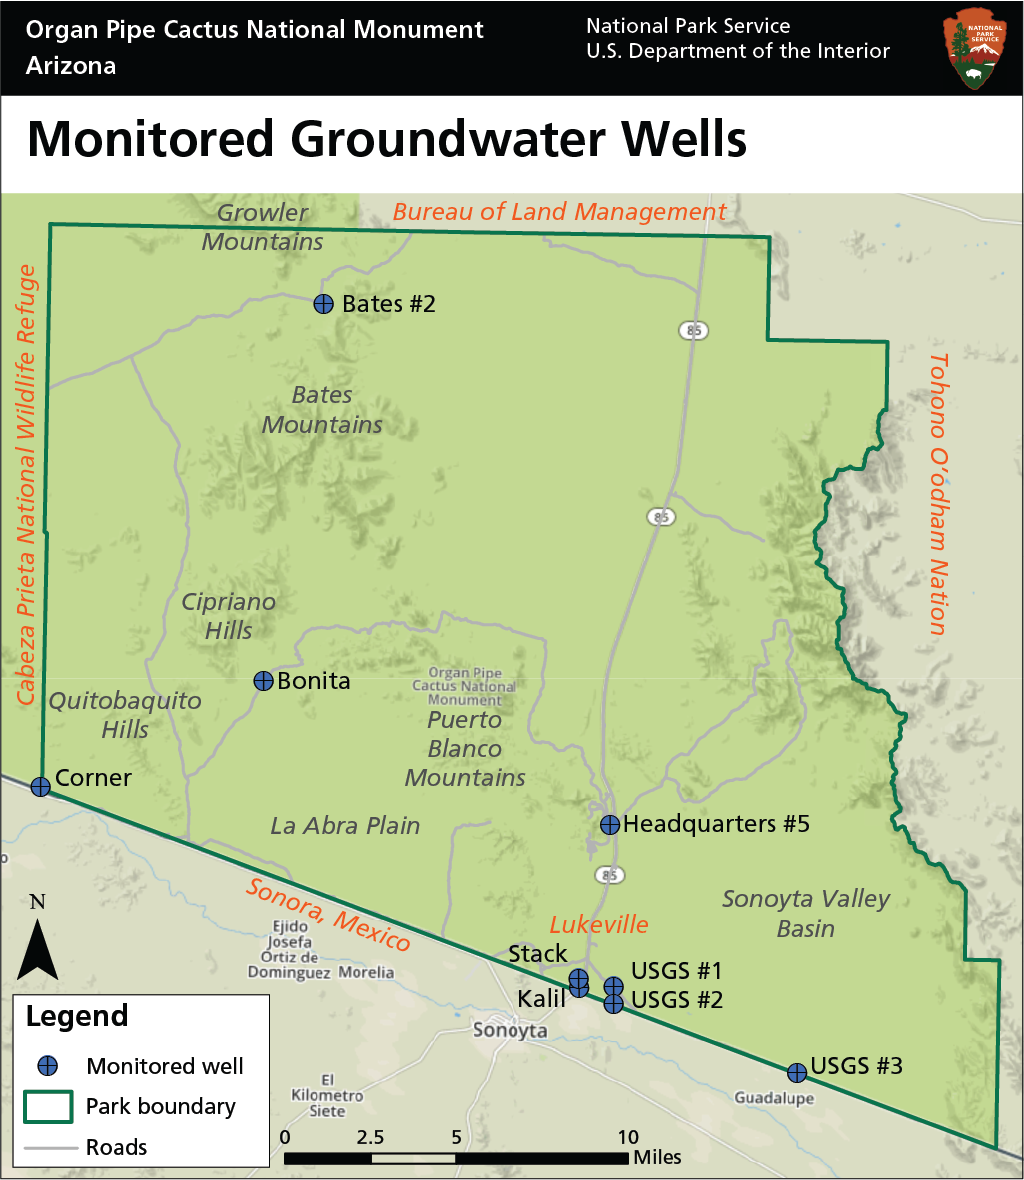 Map of Organ Pipe Cactus NM, showing location of nine monitored wells.